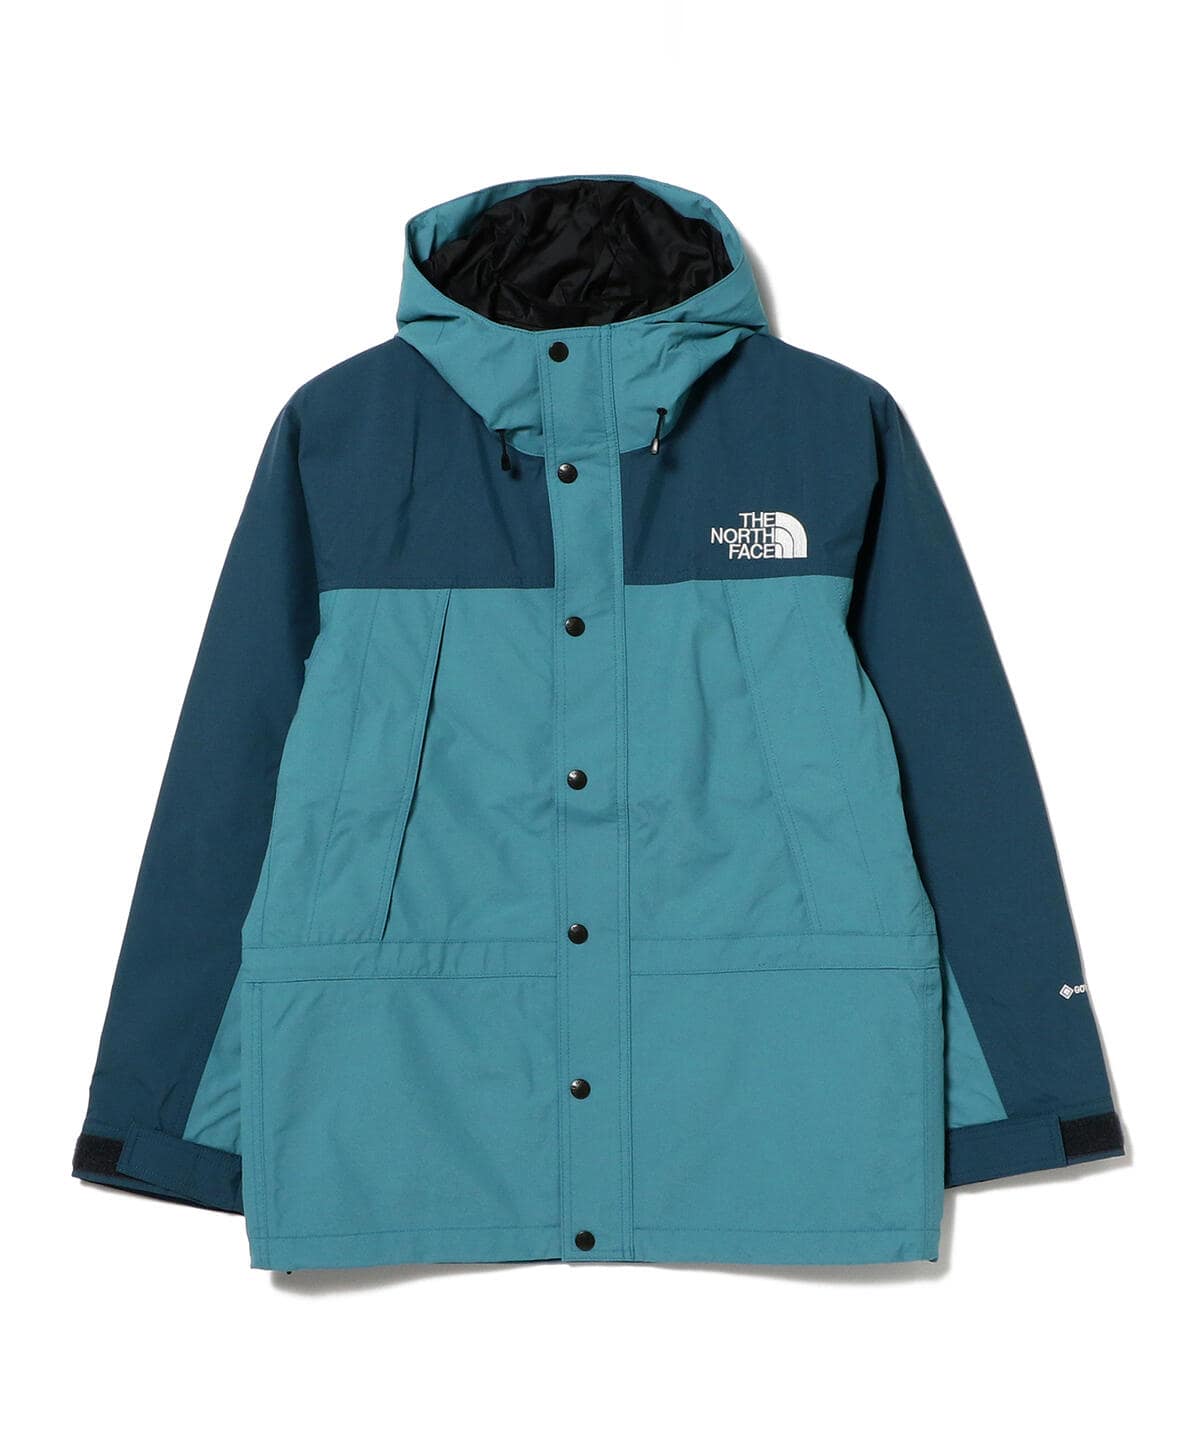 BEAMS（ビームス）THE NORTH FACE / Mountain Light Jacket 